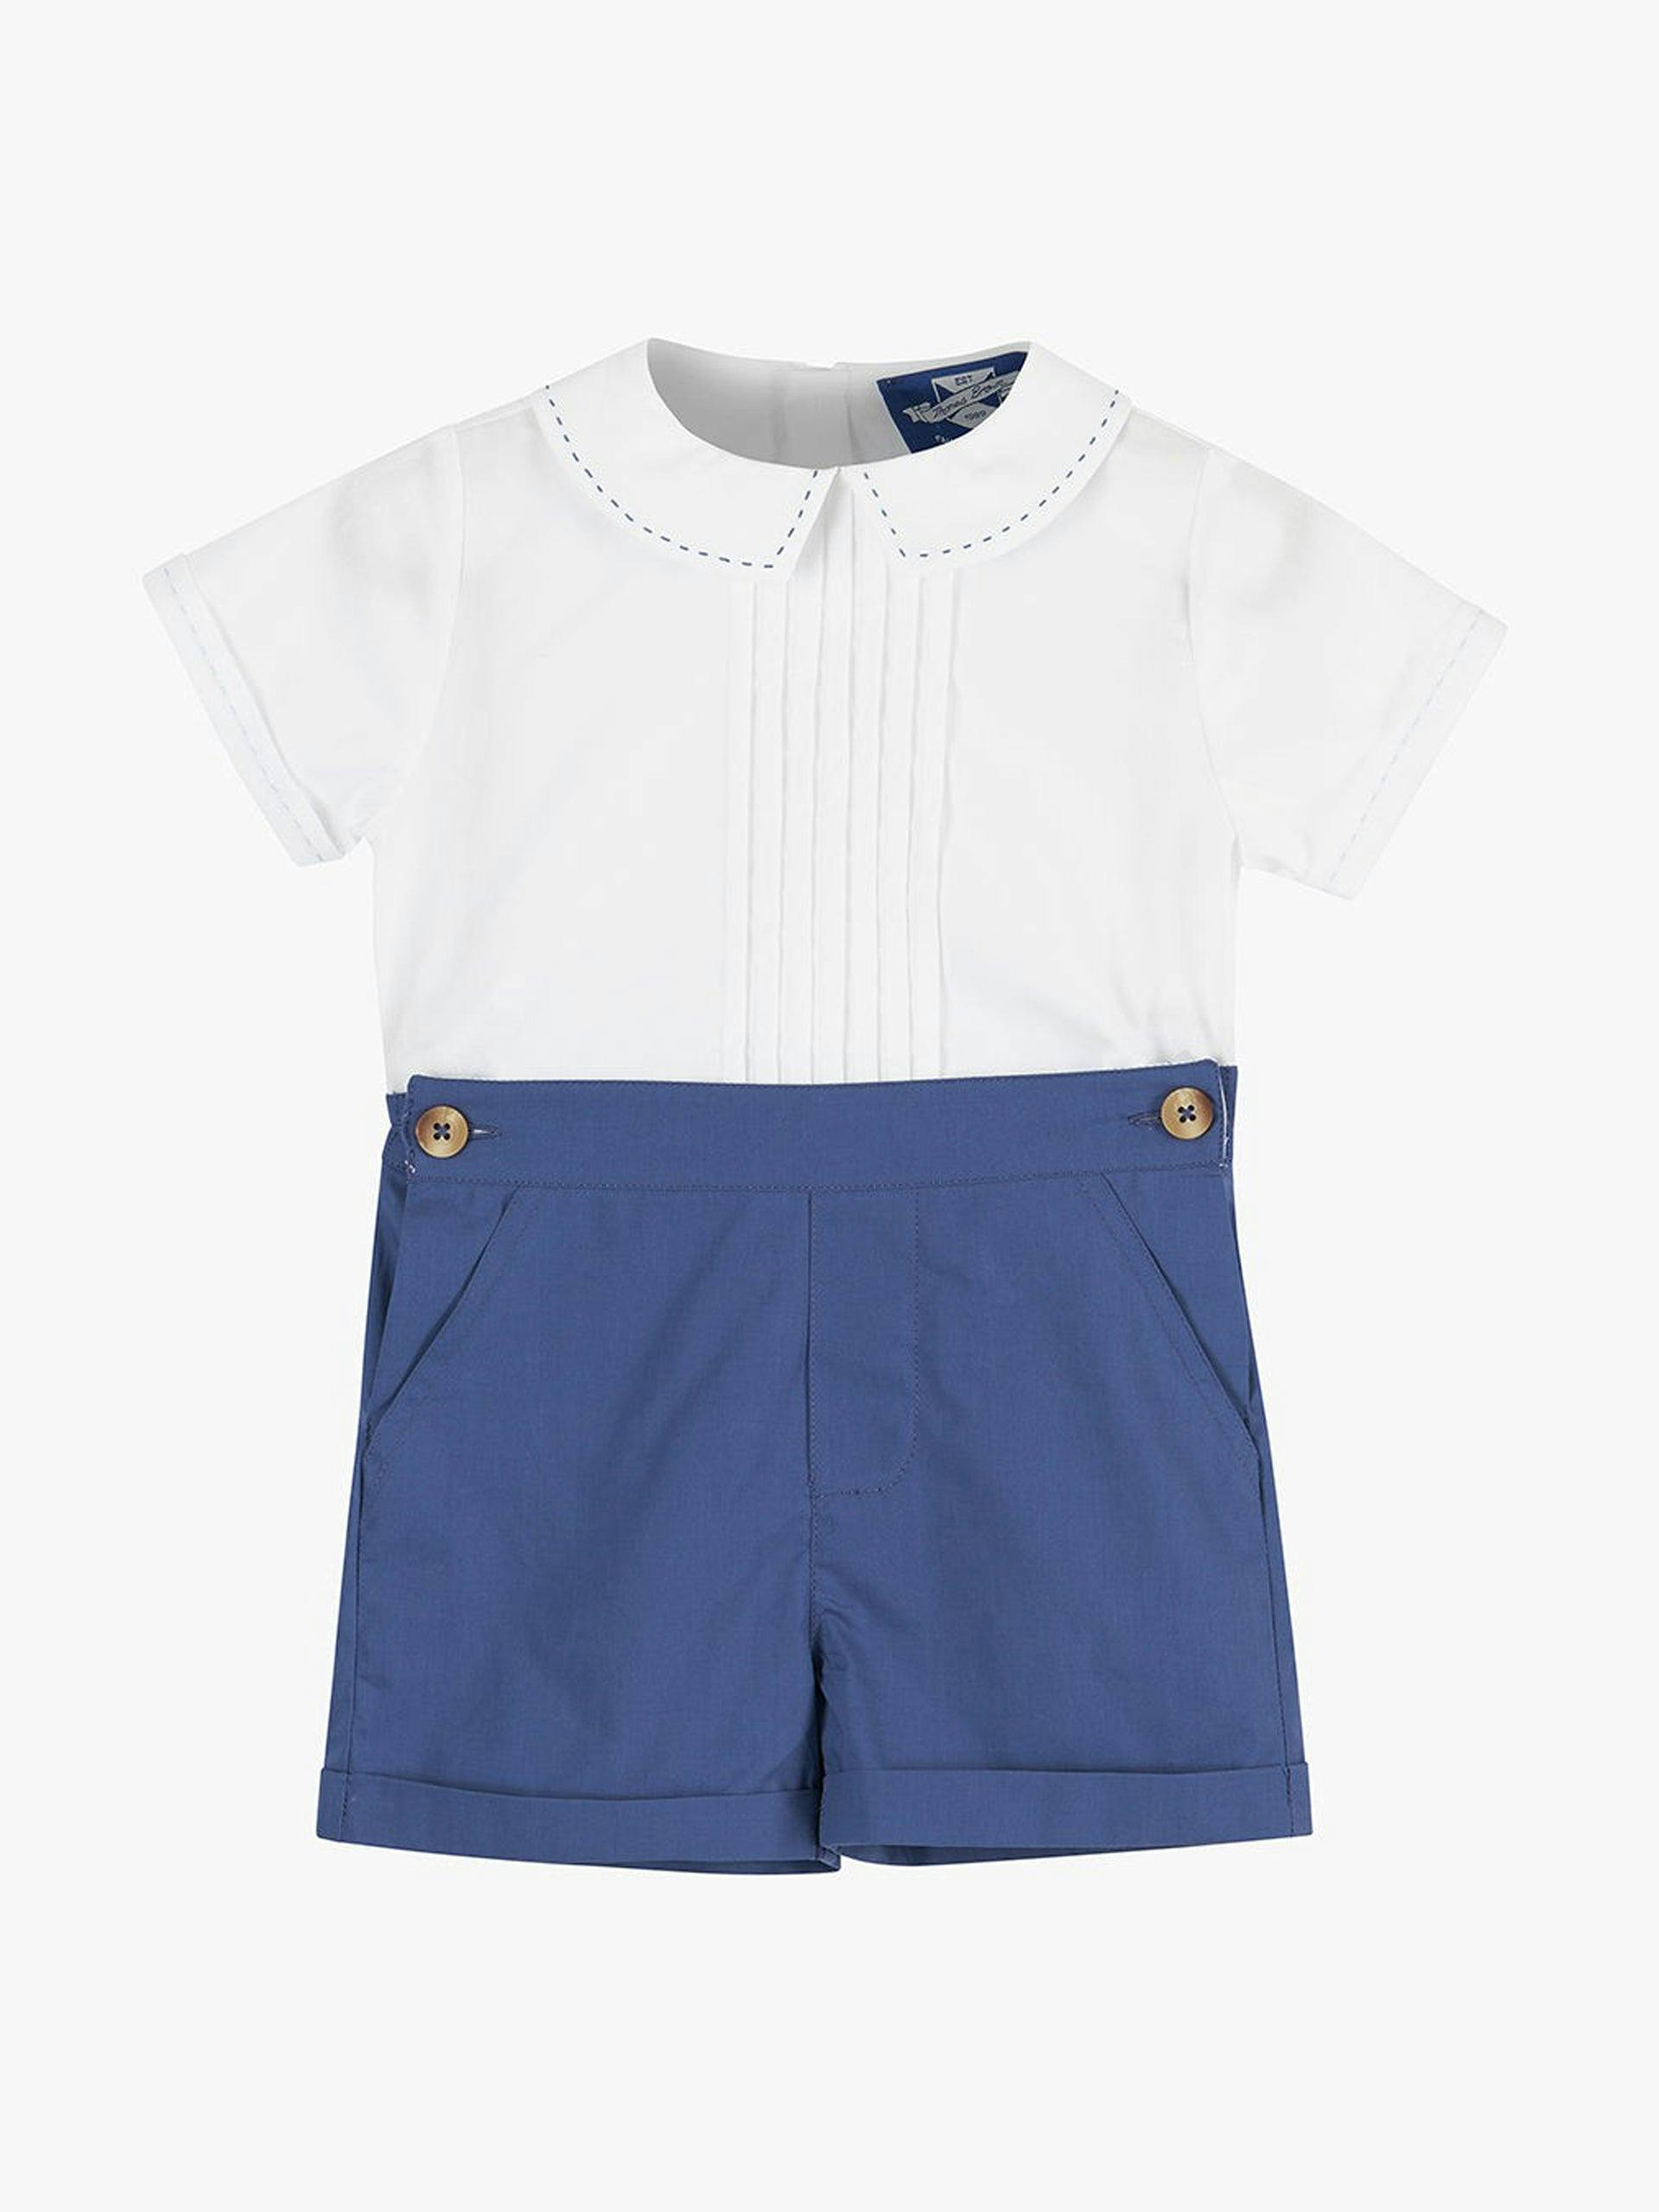 Little ones Rupert set in French navy and white